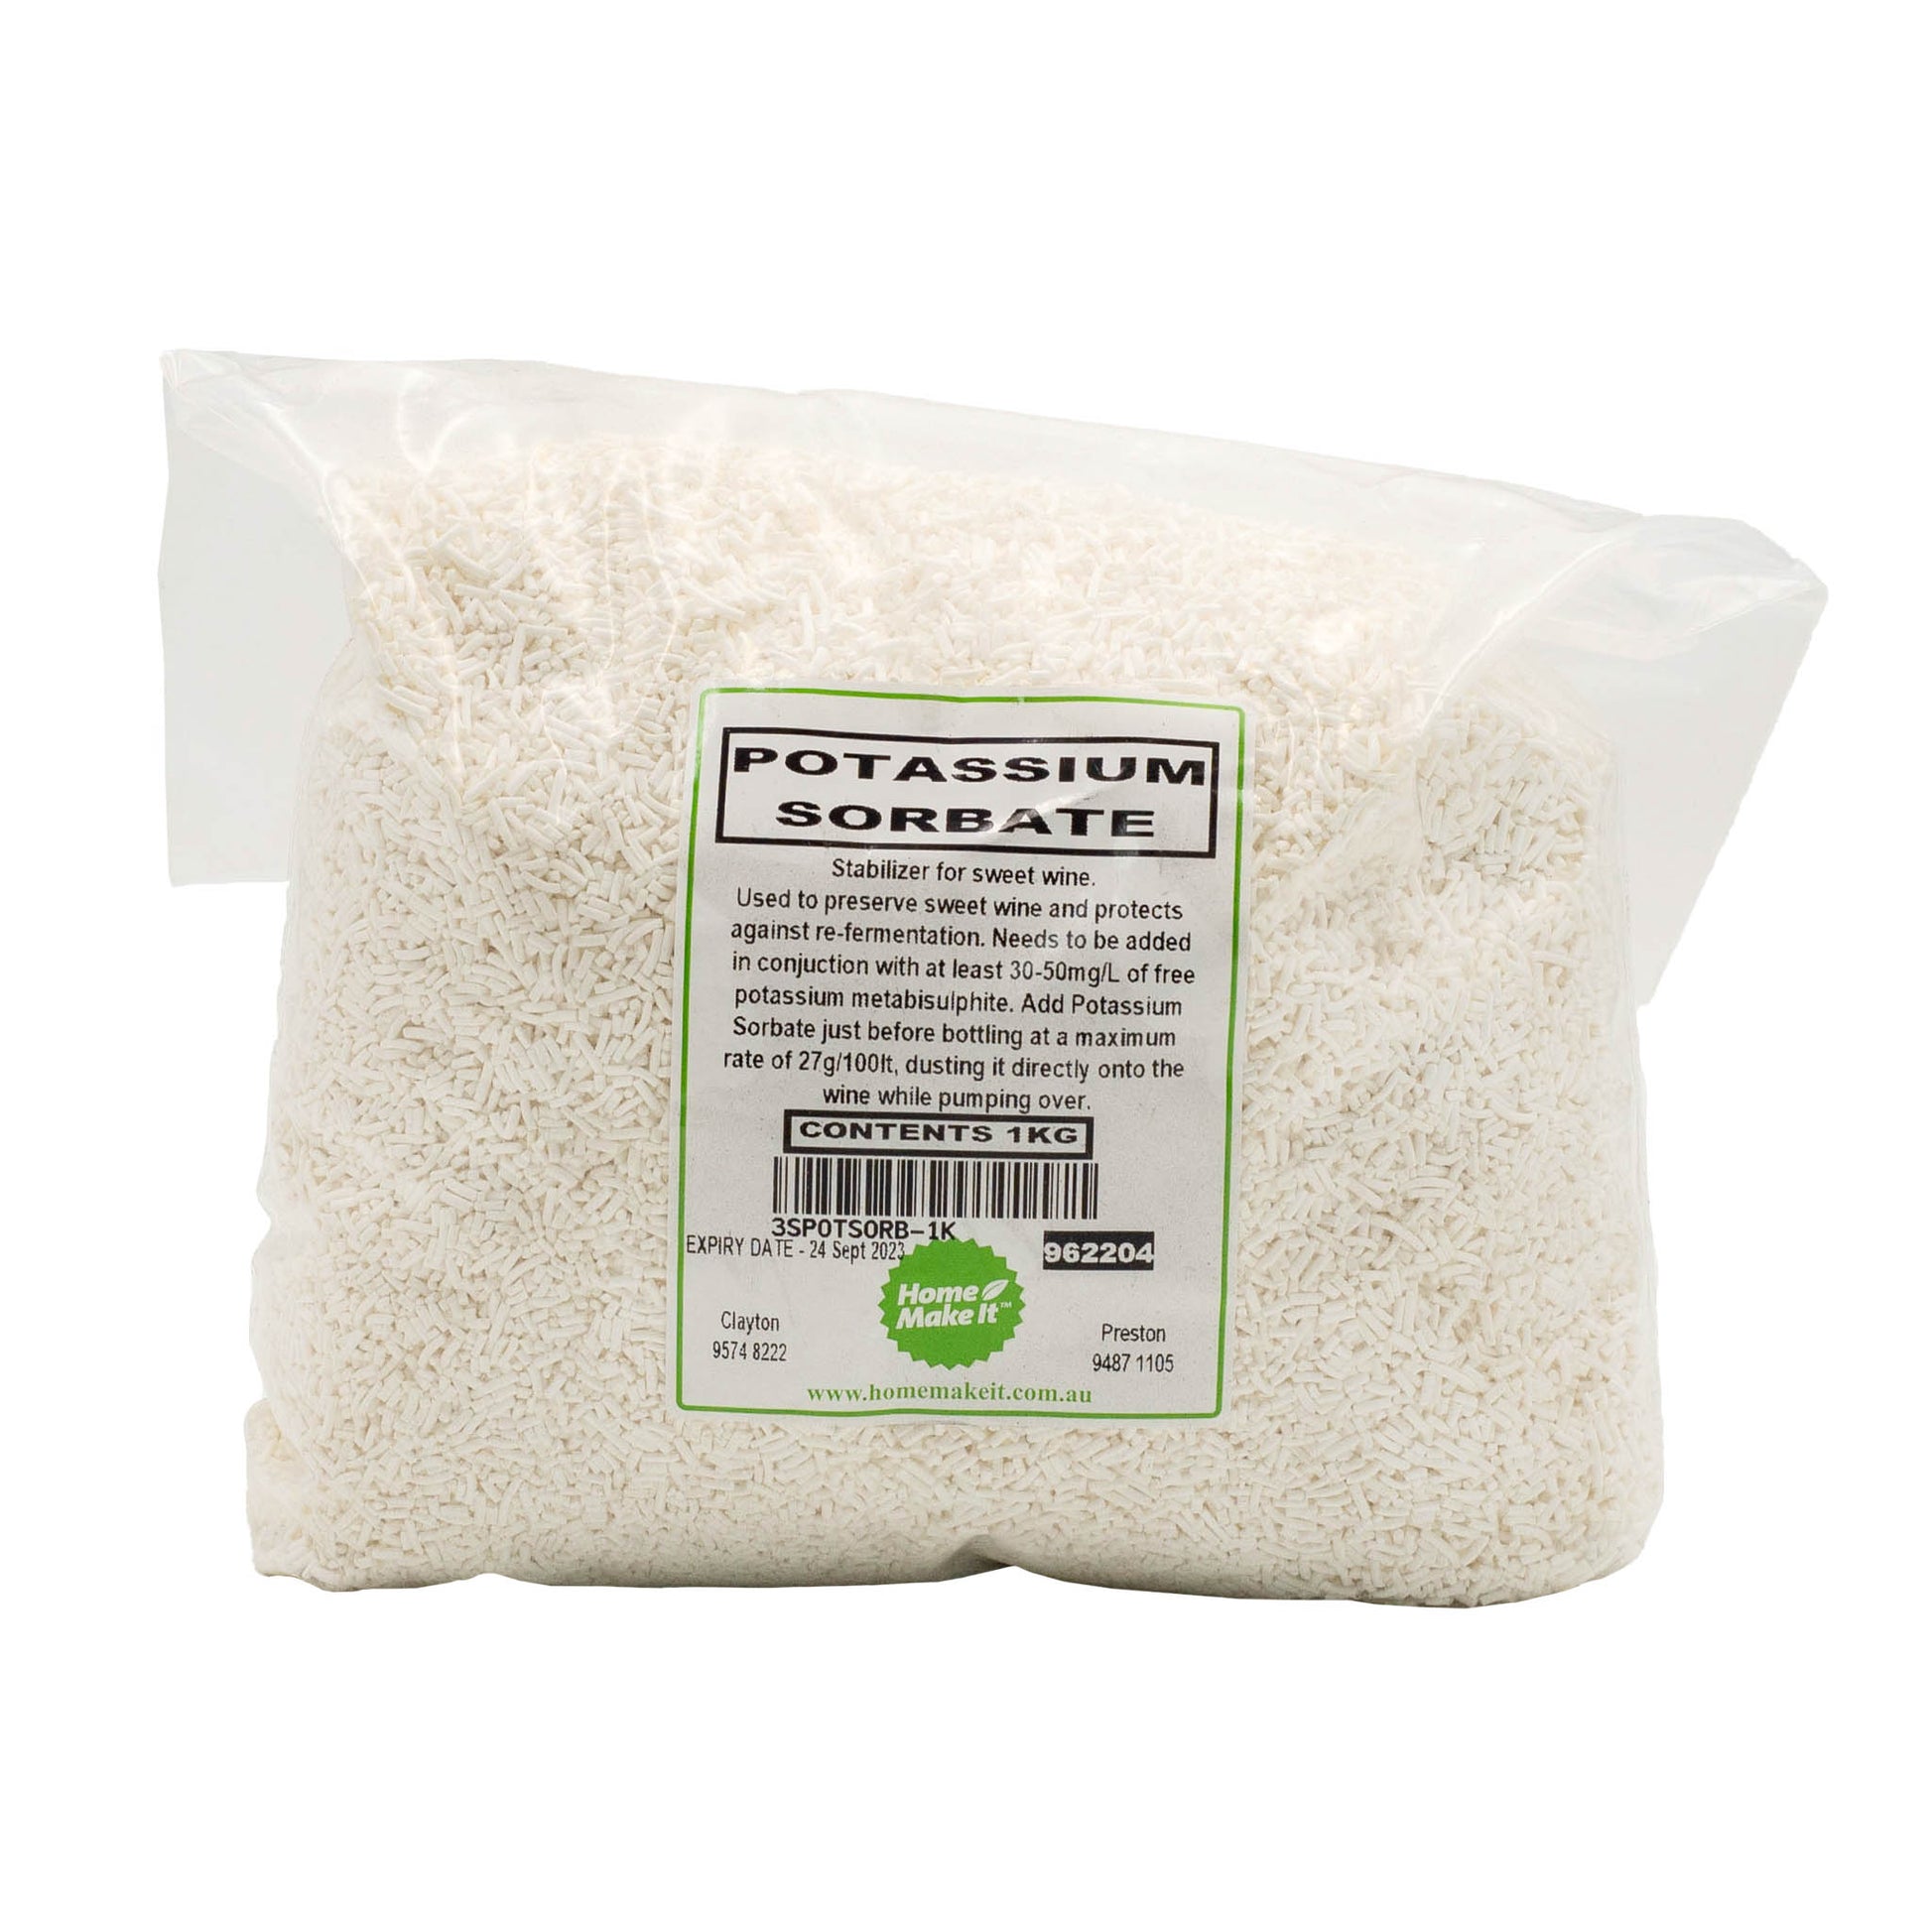 1kg bag of potassium sorbate a stabilizer and preserver for sweet wines. 